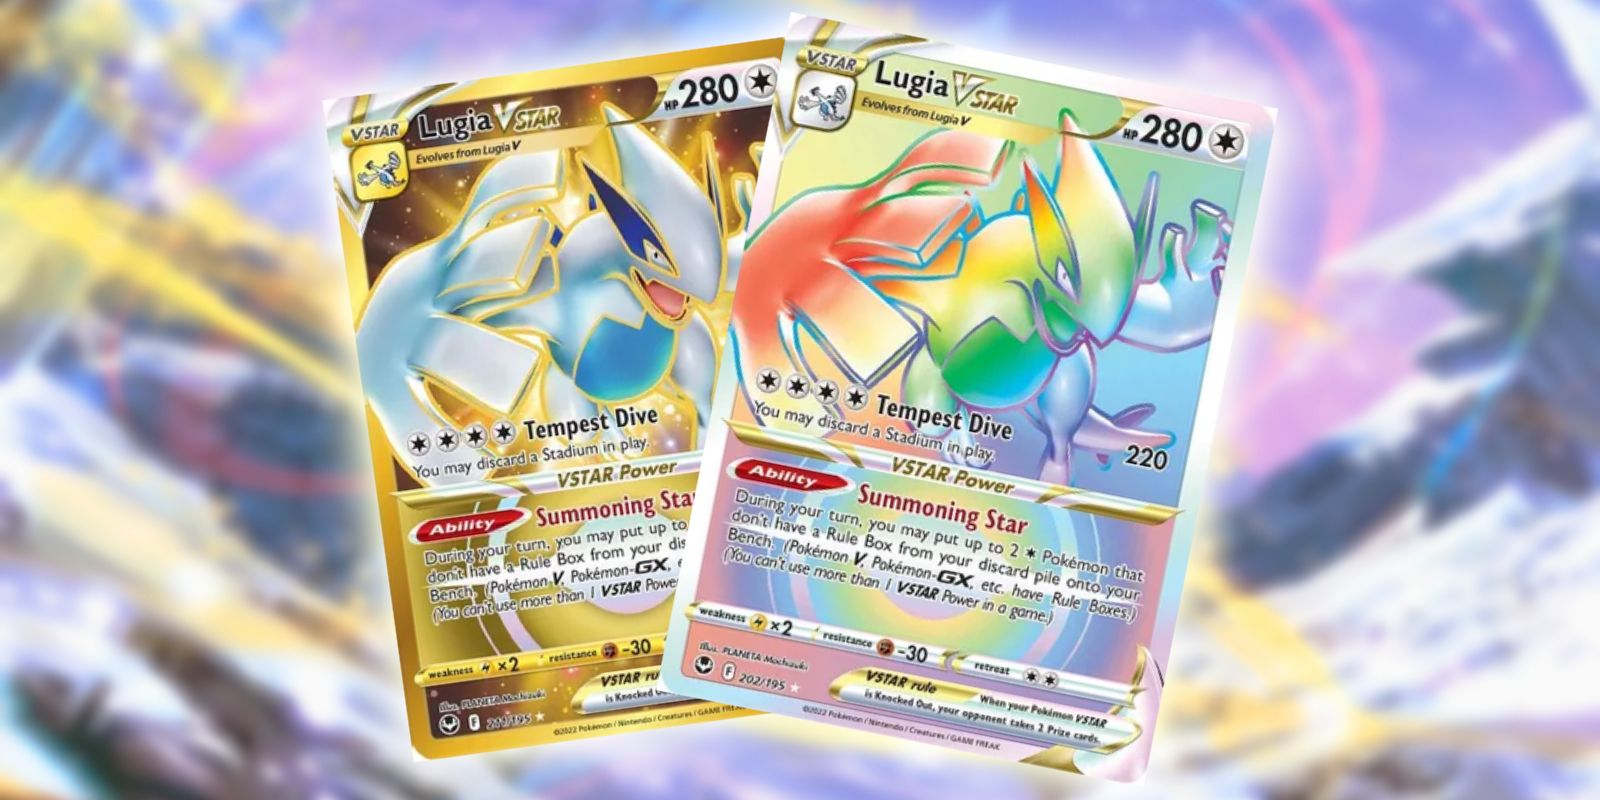 The gold and rainbow version of Lugia VSTAR's Secret card in Pokémon TCG's Silver Tempest expansion.